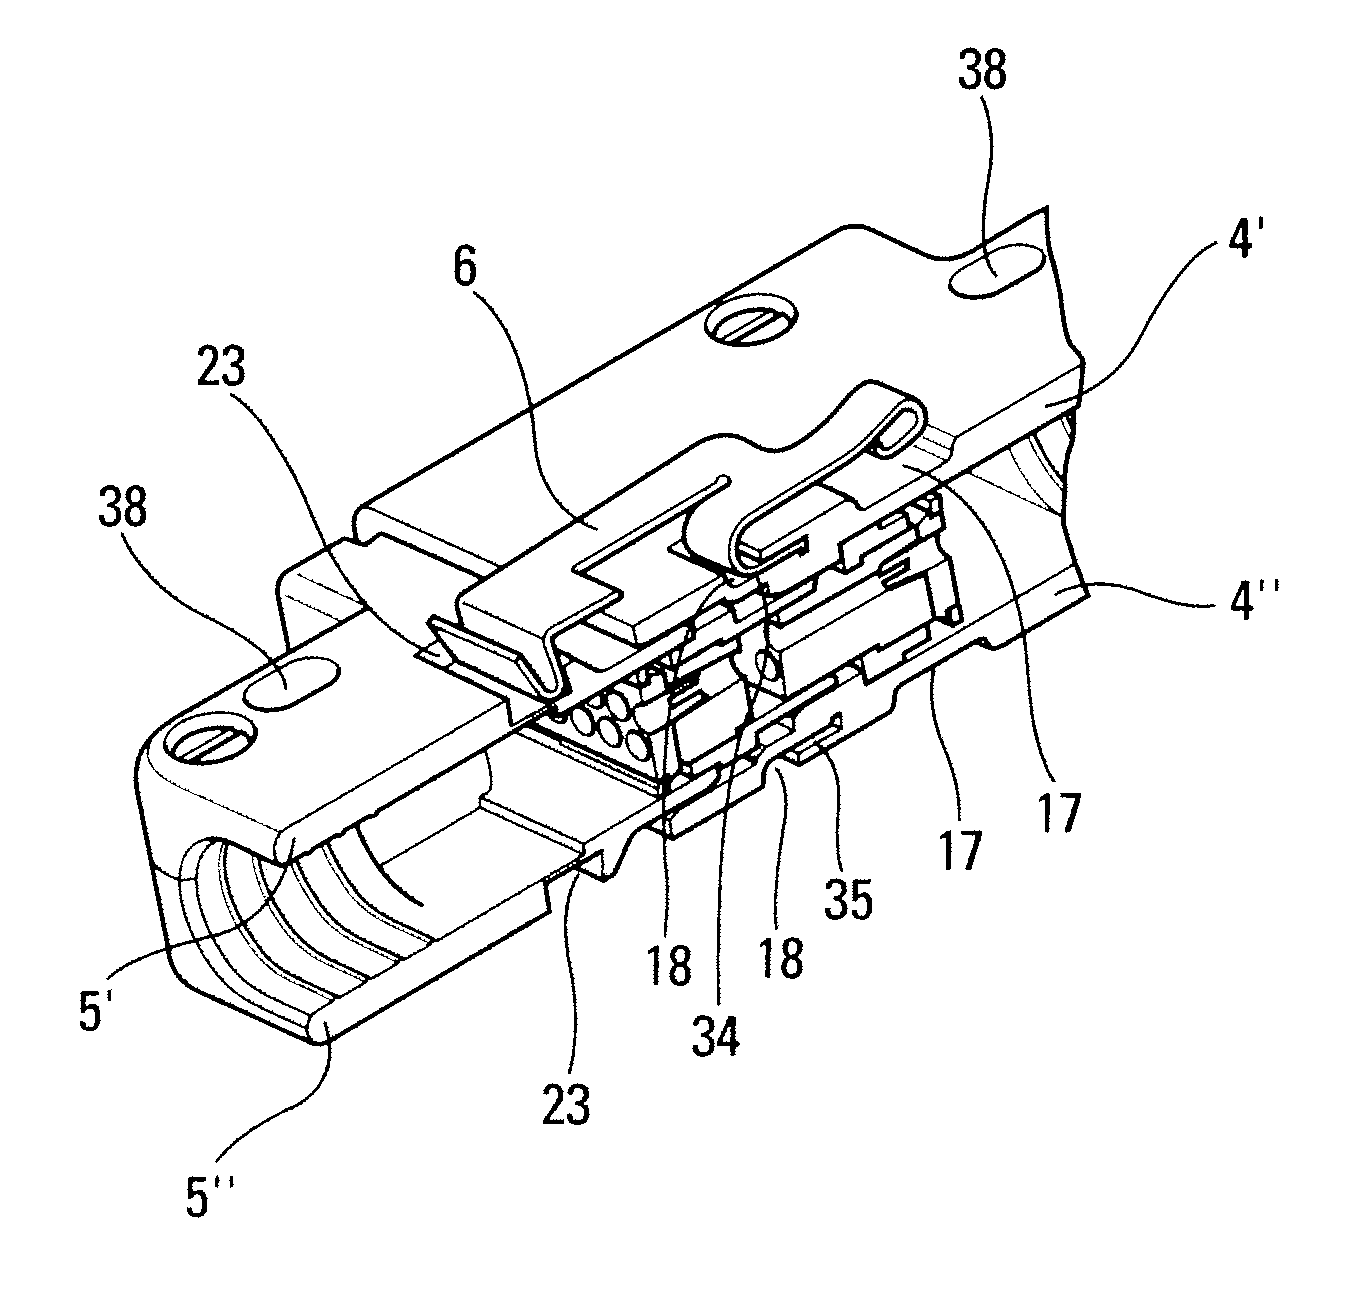 Locking device for a shielded sub-miniature connection assembly